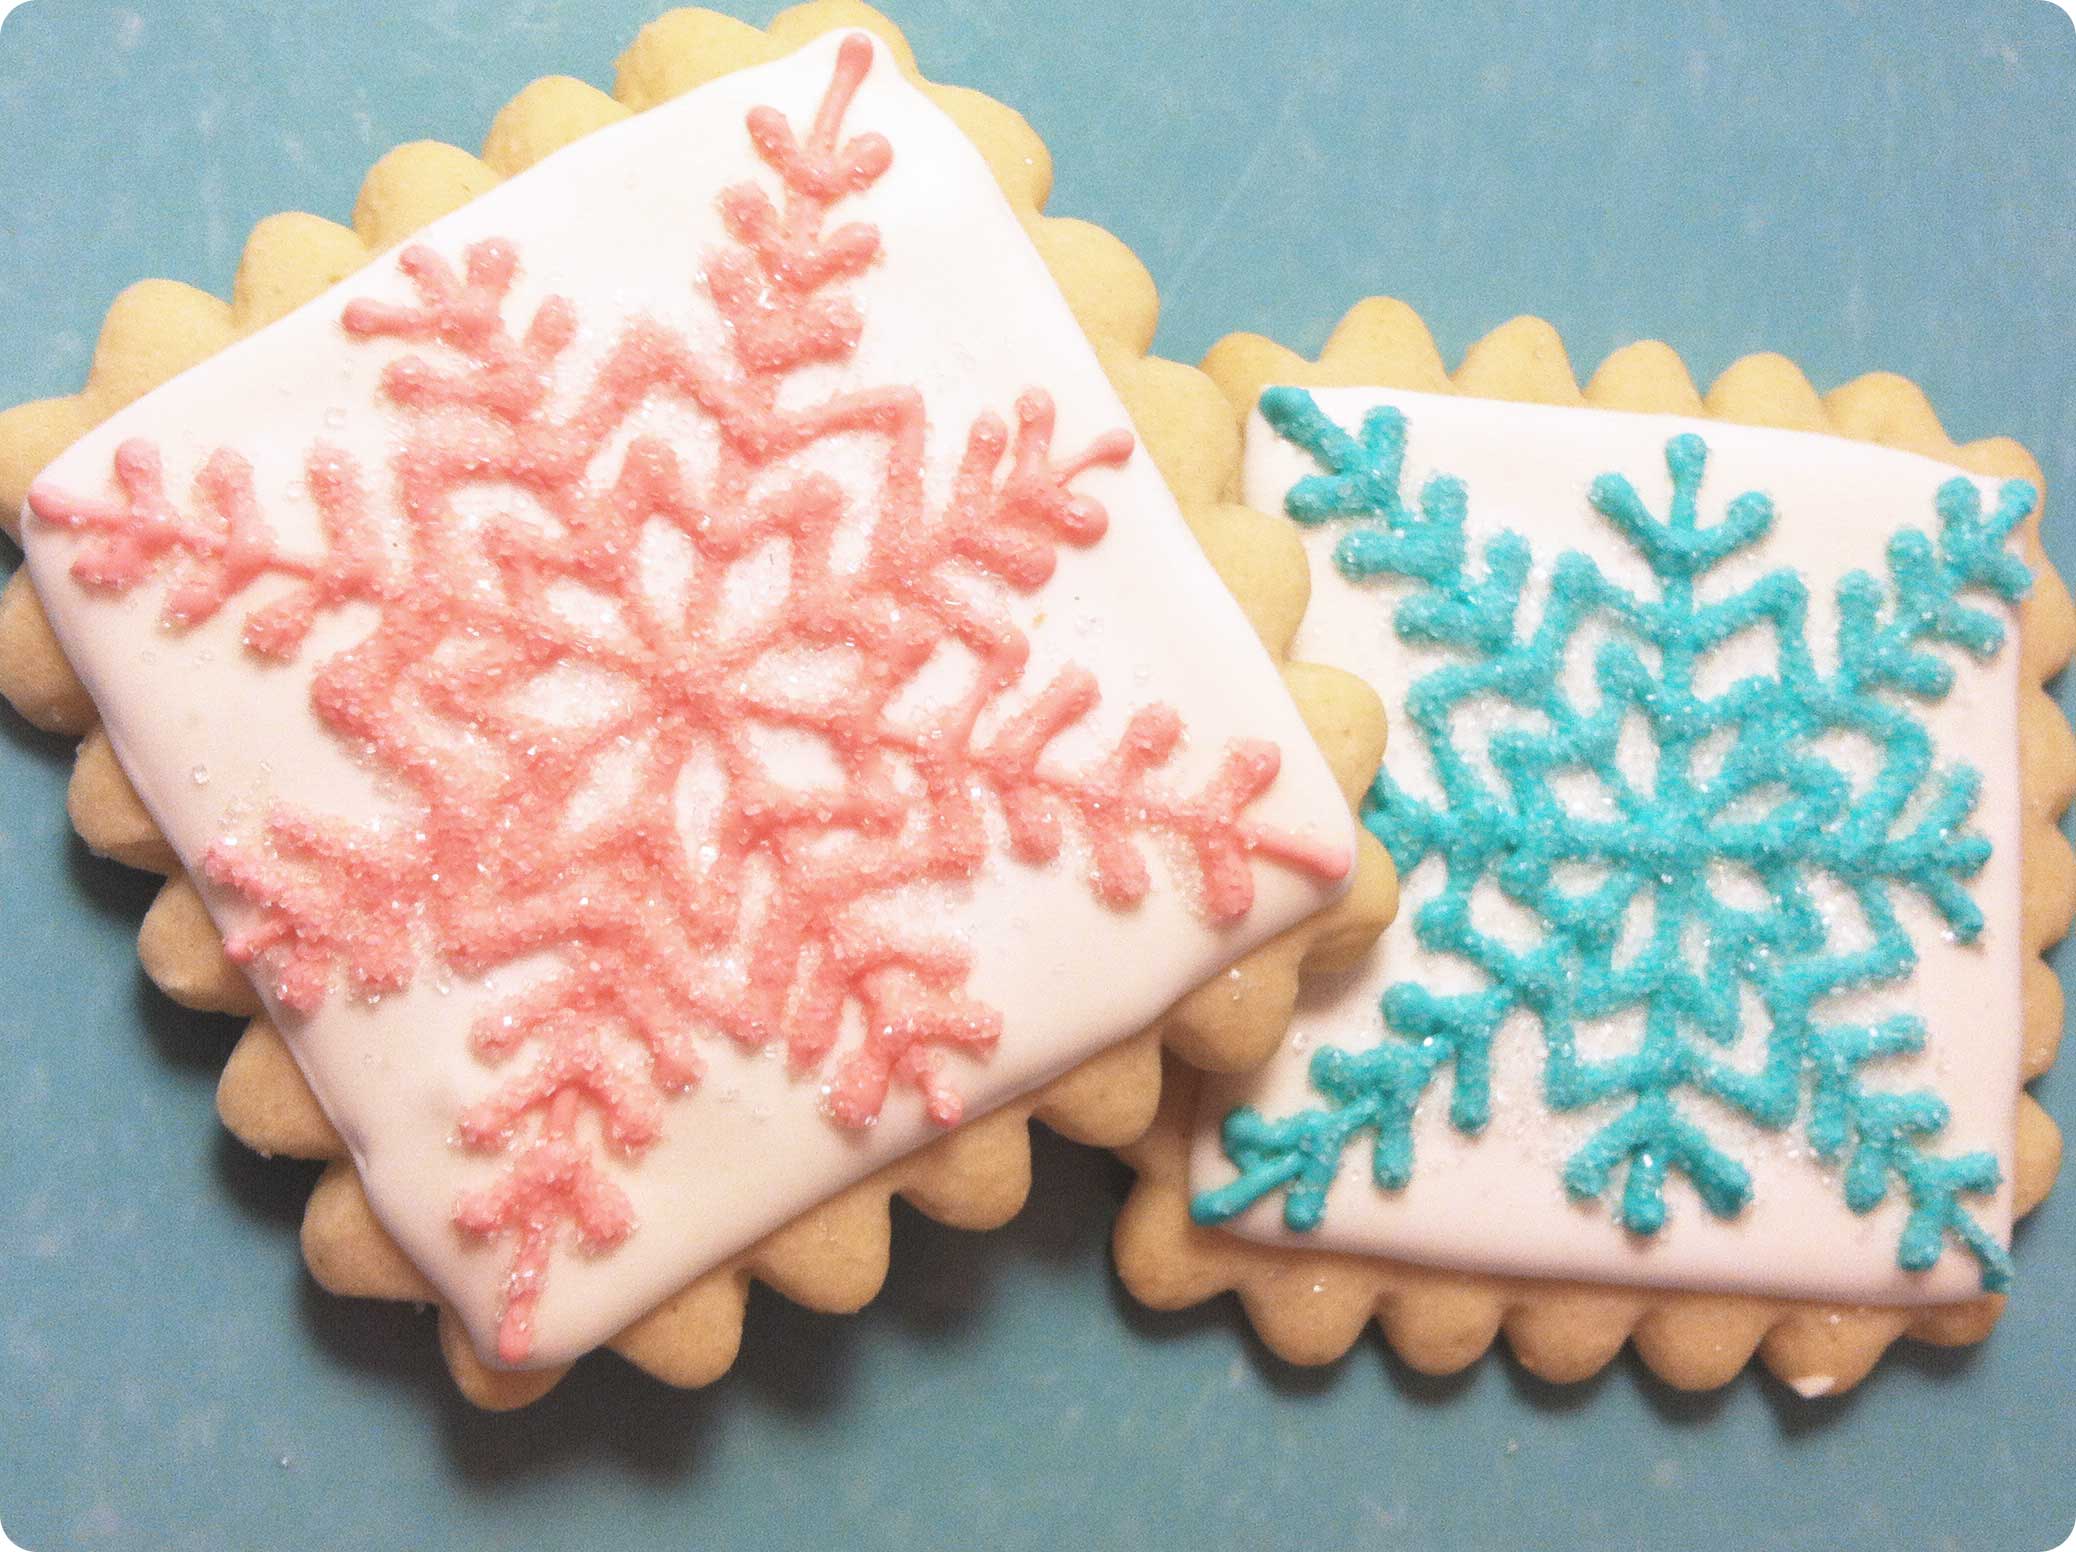 Why is my royal icing not hardening? - Foodly